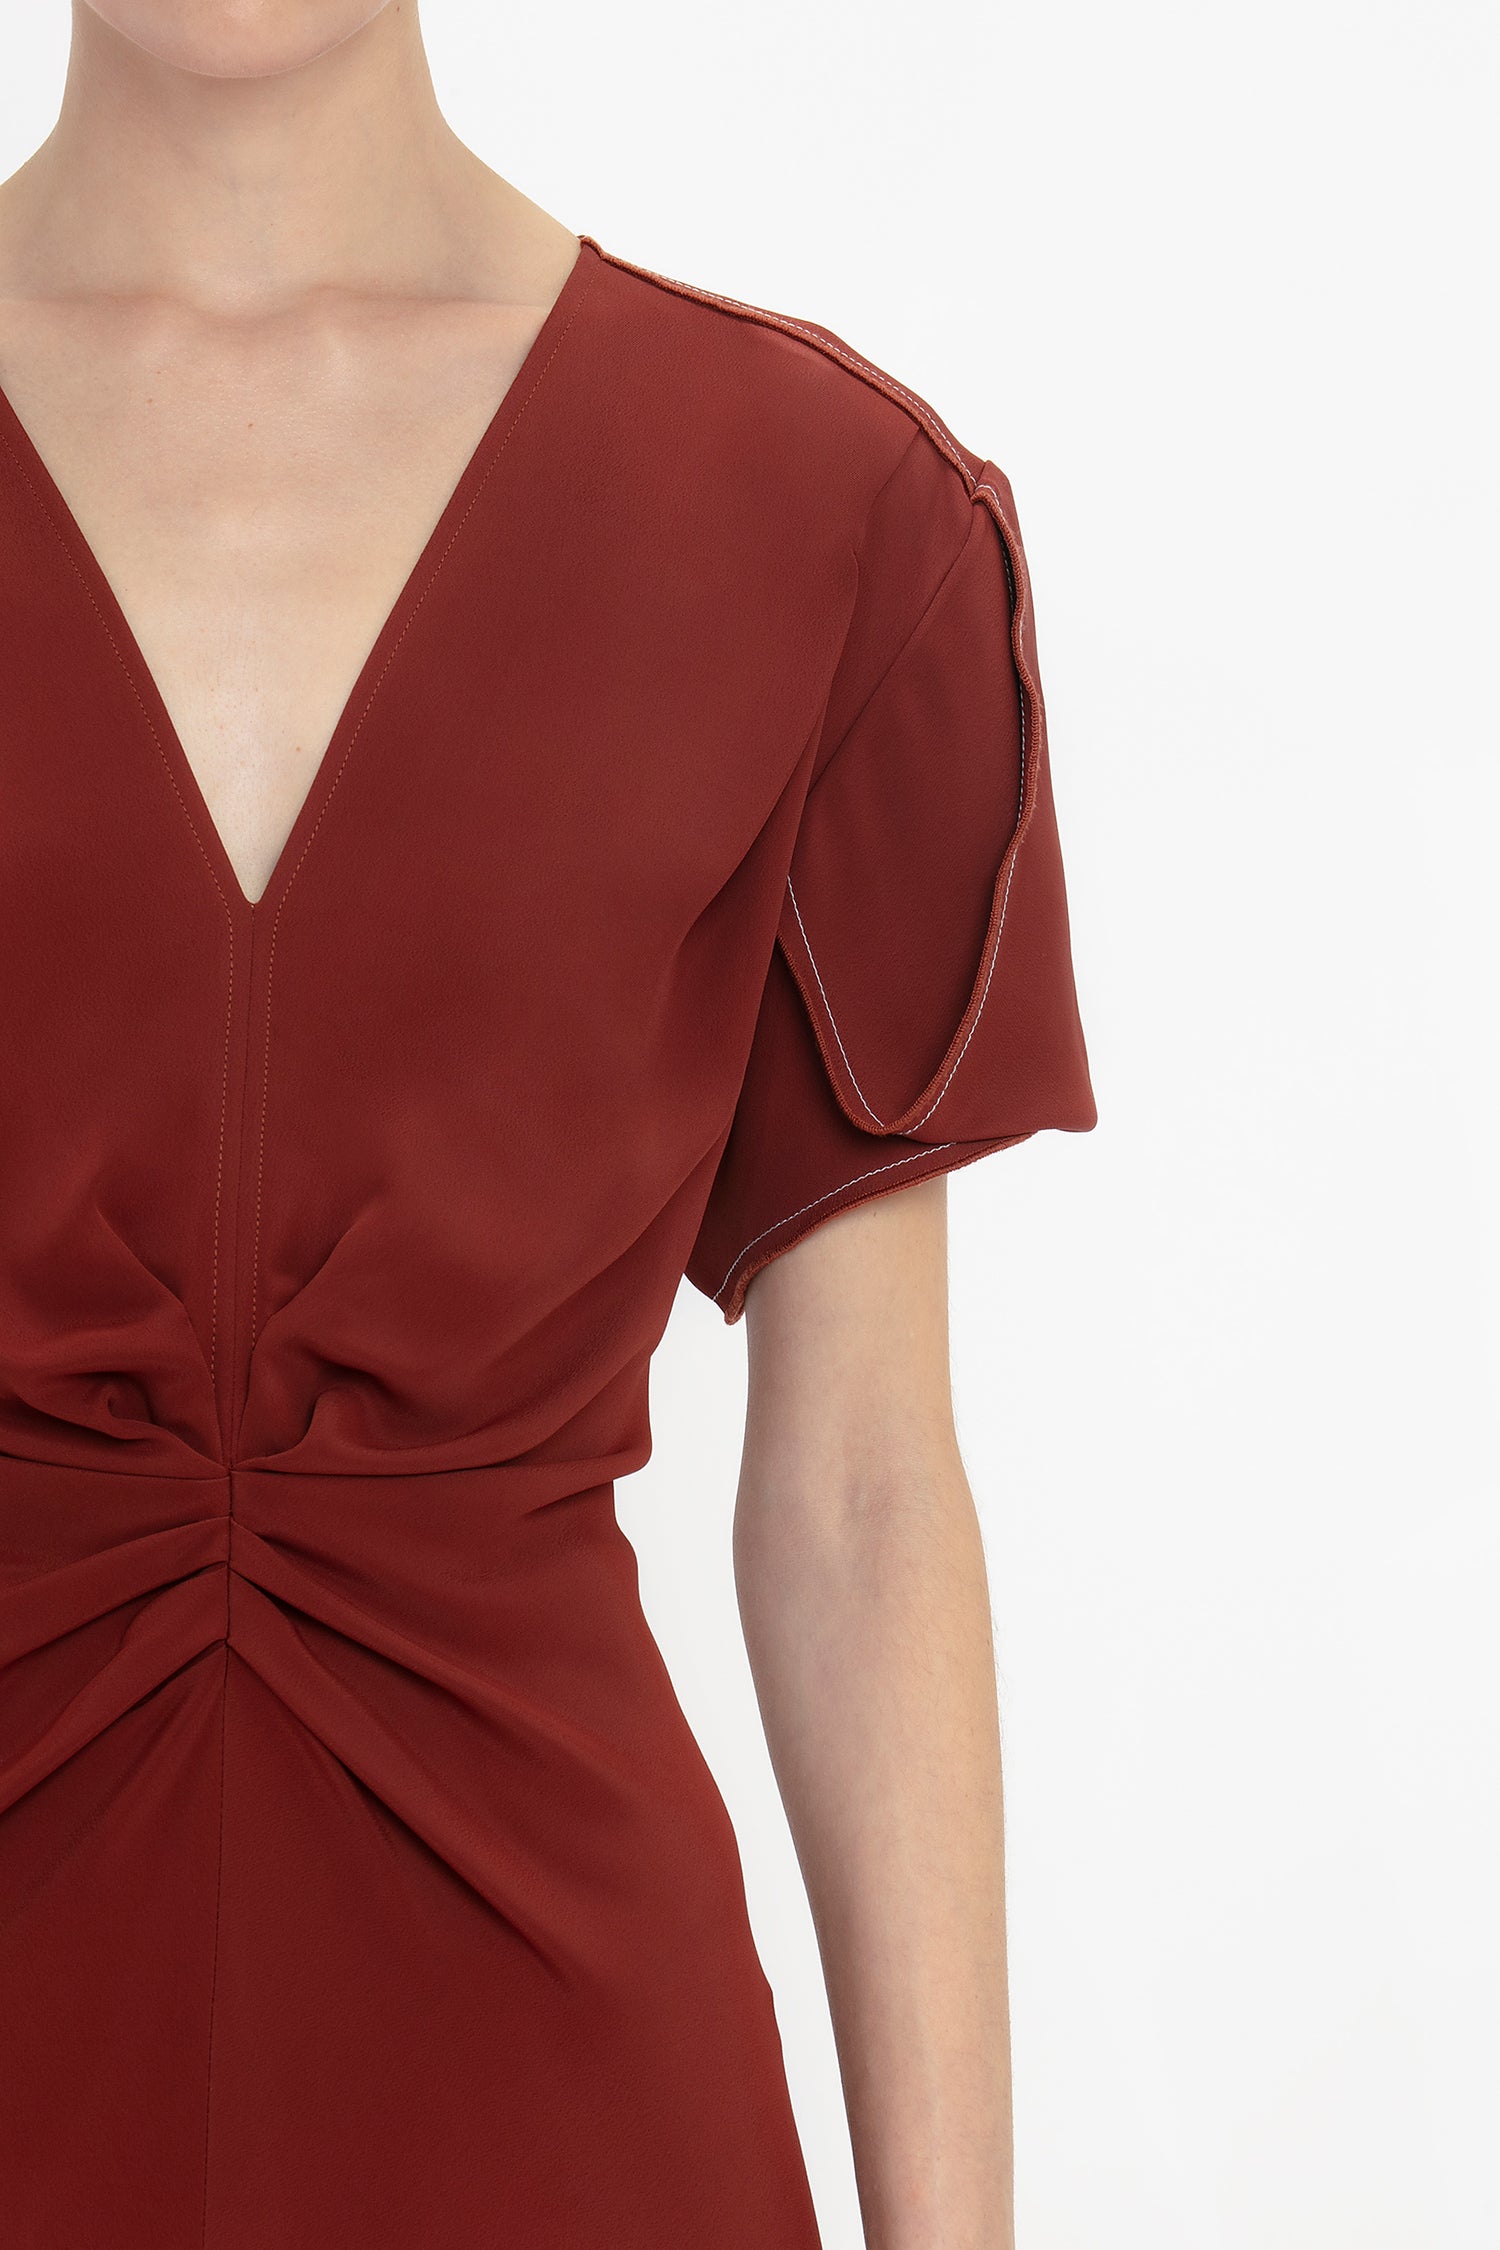 Person wearing a rust-colored Gathered V-Neck Midi Dress In Russet by Victoria Beckham with figure-flattering stretch fabric and waist-defining pleat detail.